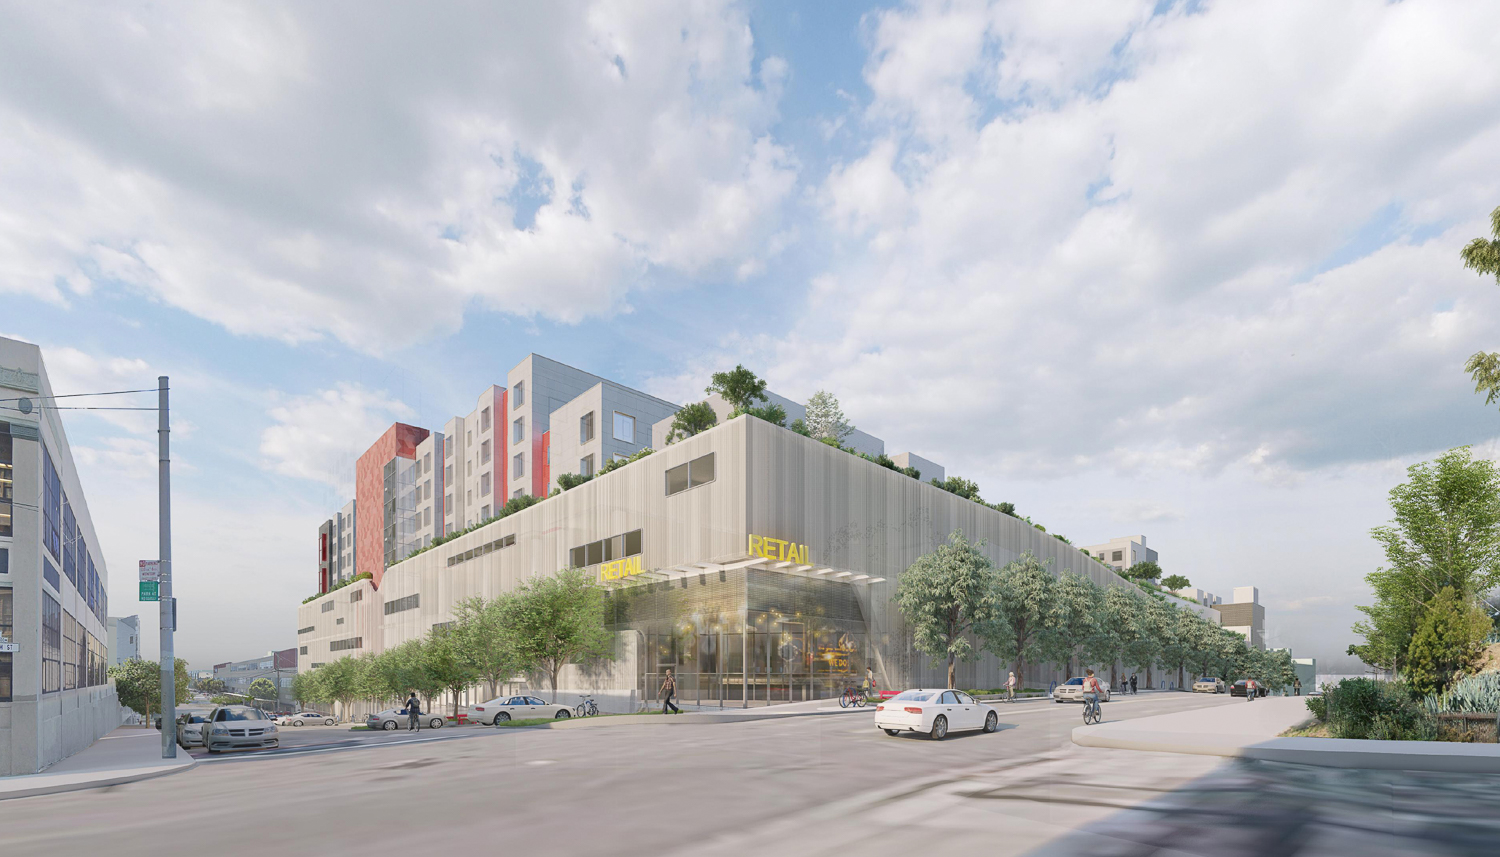 Potrero Yard retail space at the corner of Hampshire Street, rendering by IBI Group